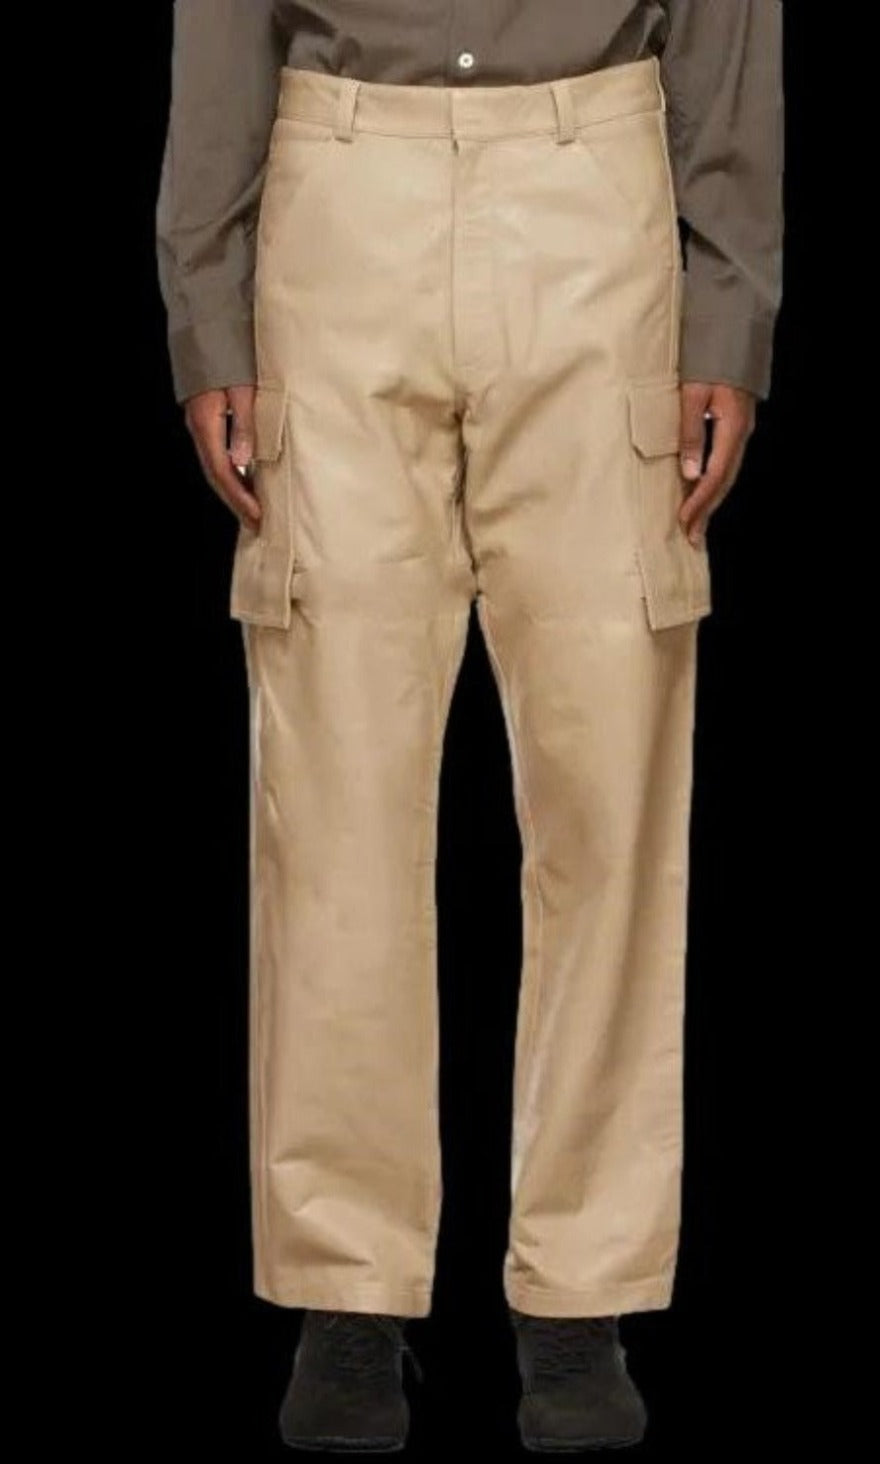 Picture of a model wearing our white leather cargo pants, front view. with black background for contrast.